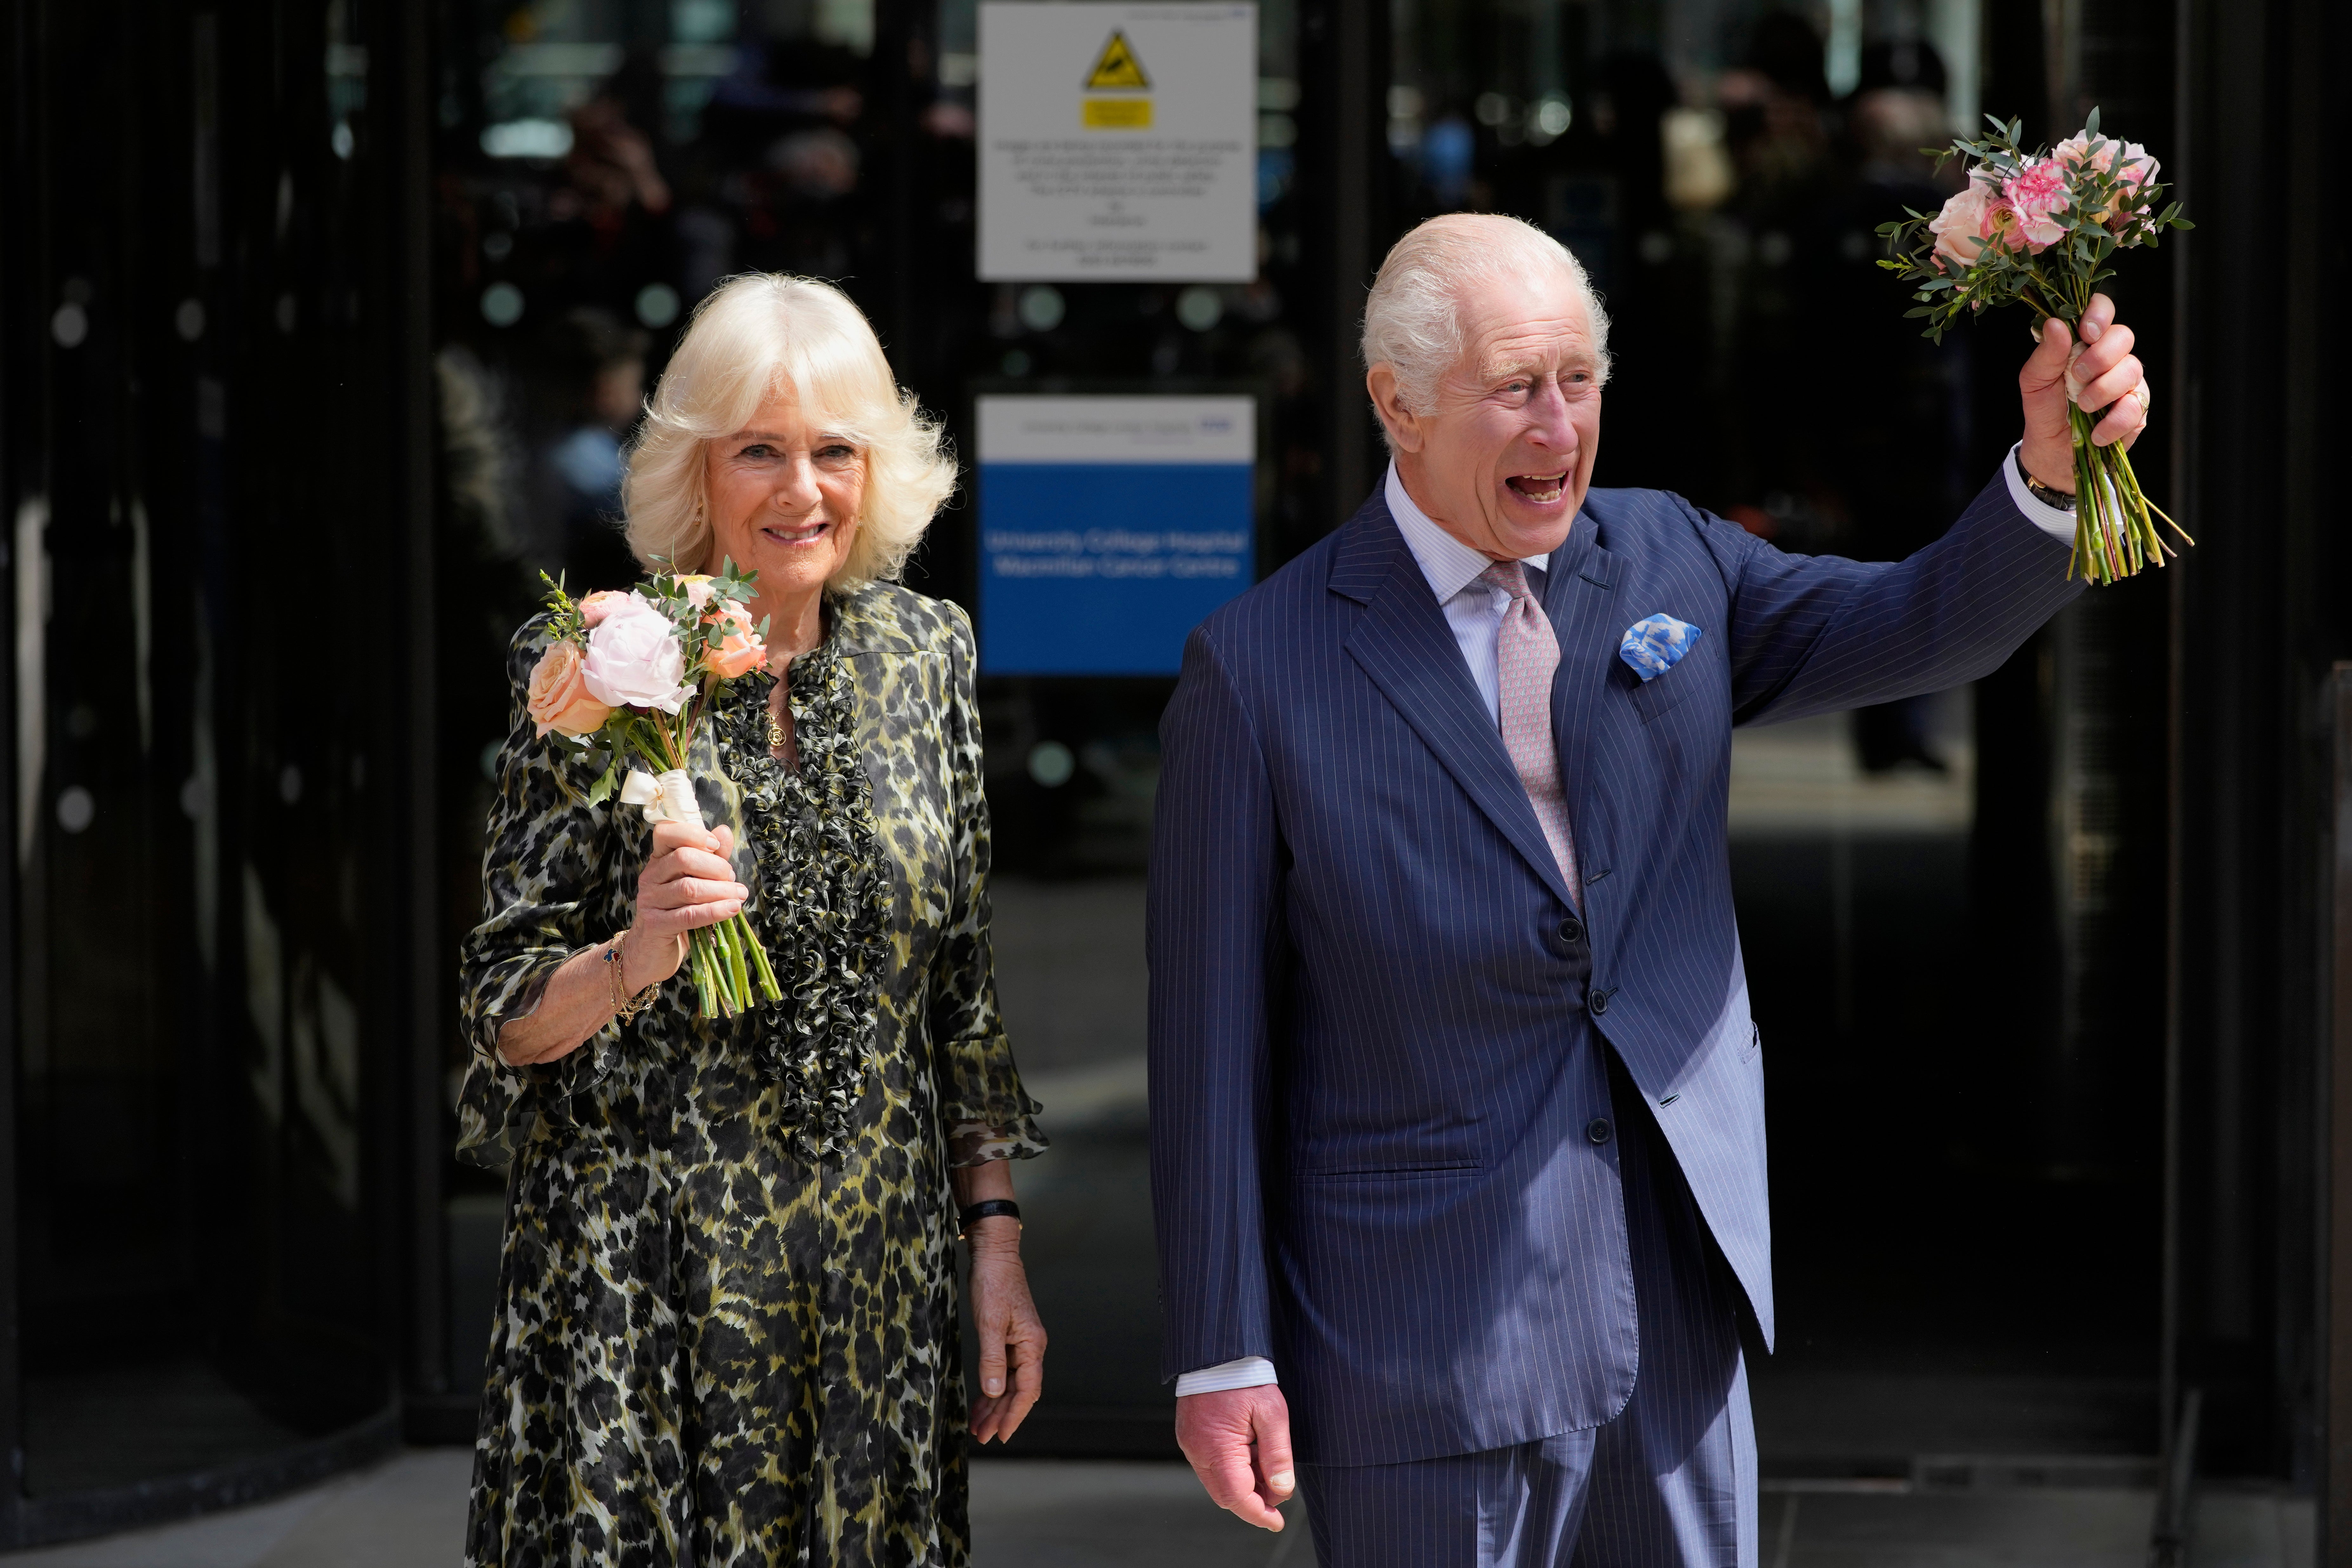 King Charles III and Queen Camilla hold flowers they were given as they leave after the visit on Tuesday